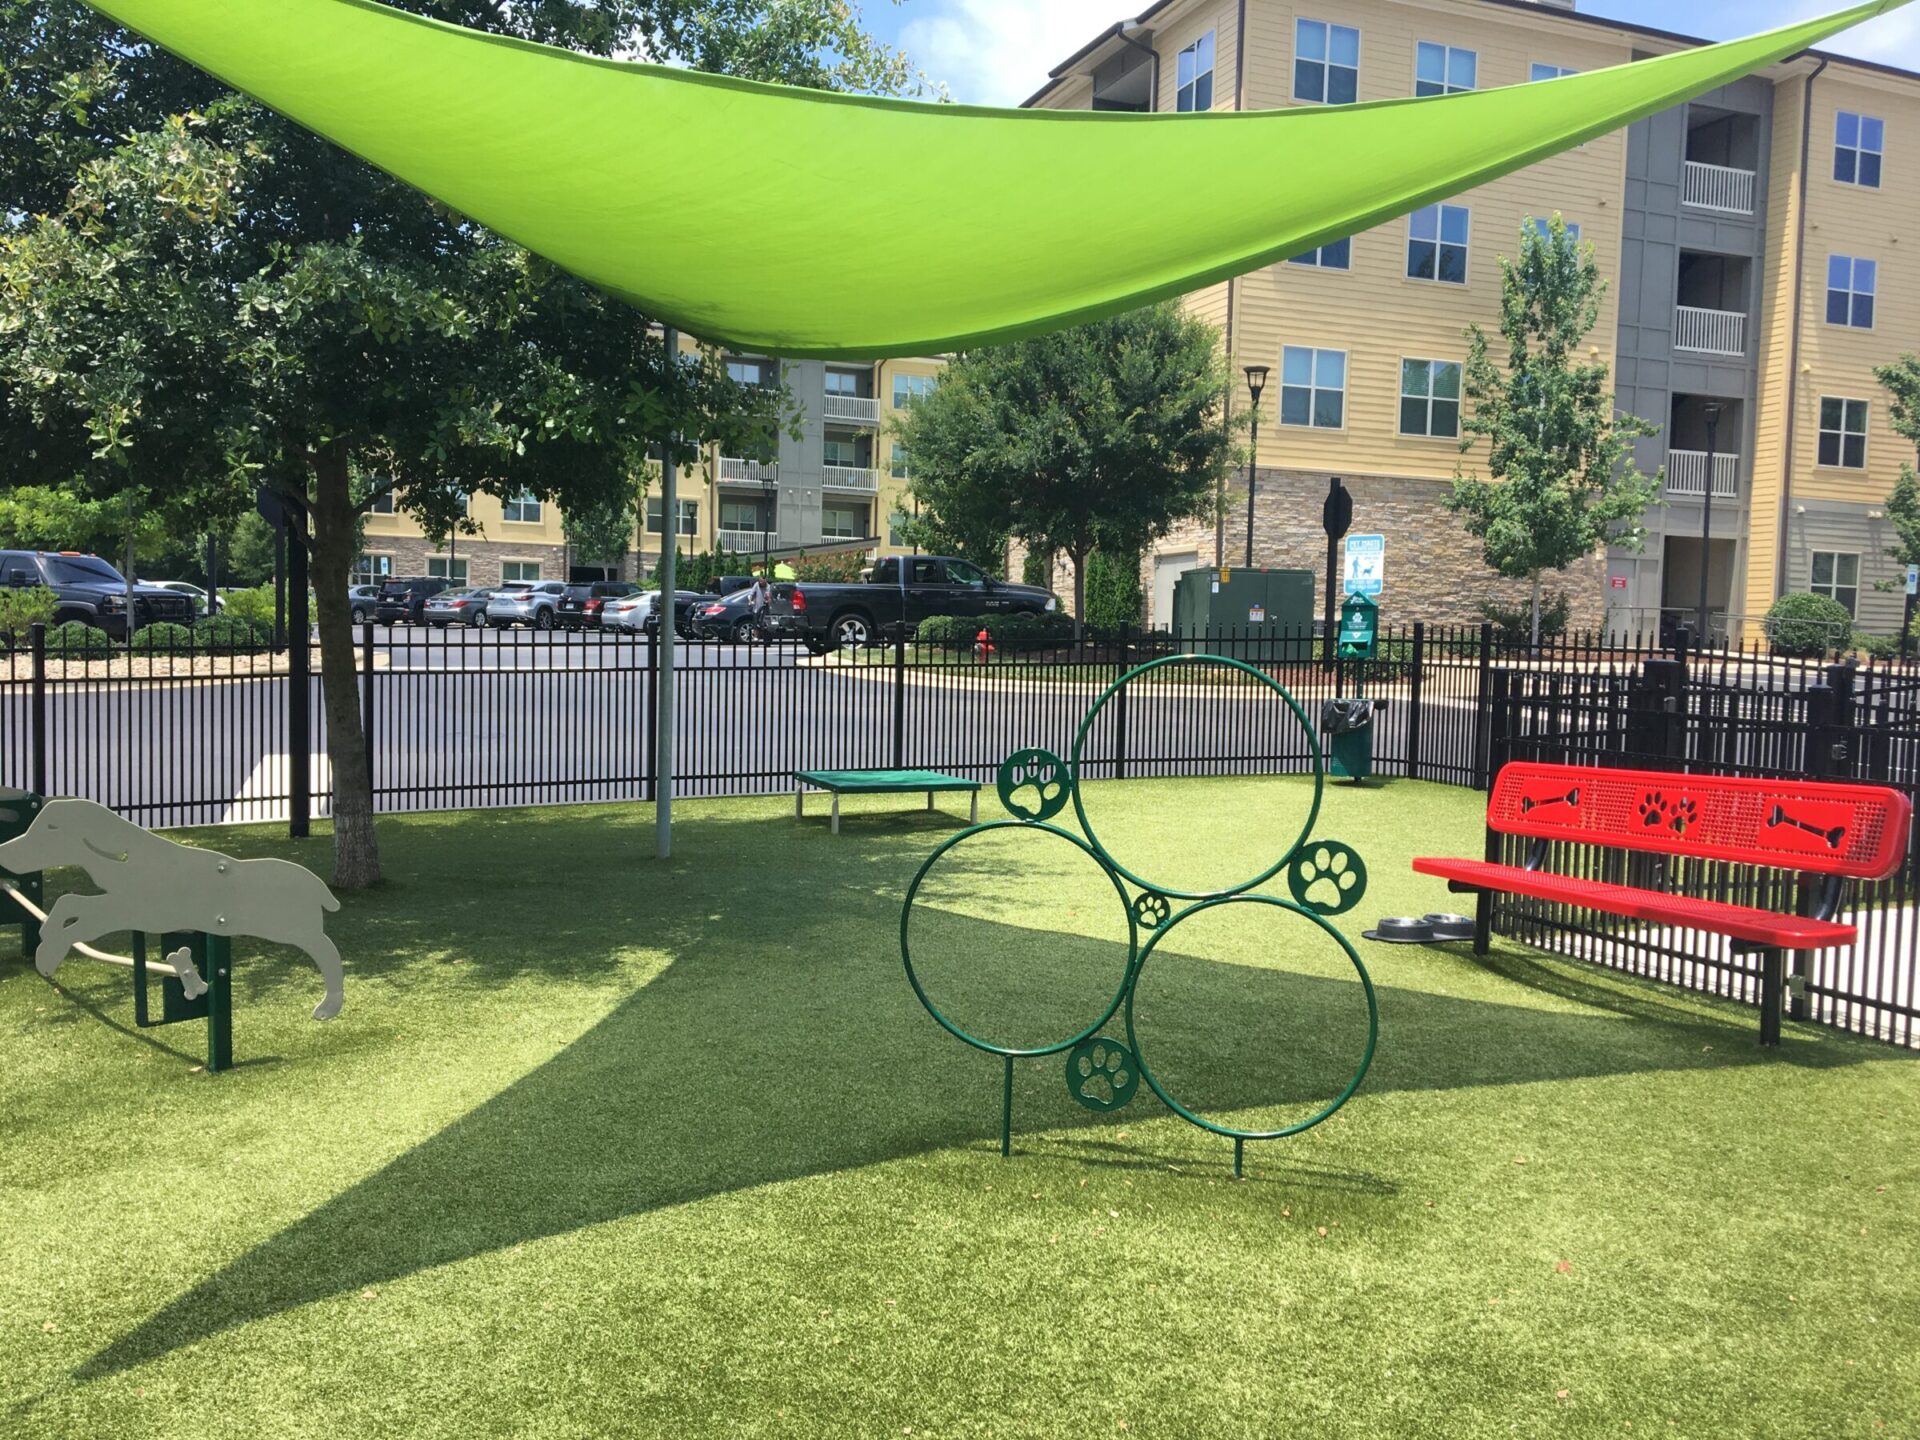 A sunny dog park with artificial grass, featuring agility equipment, benches with canine motifs, and a green shade sail. Apartment buildings are visible in the background.